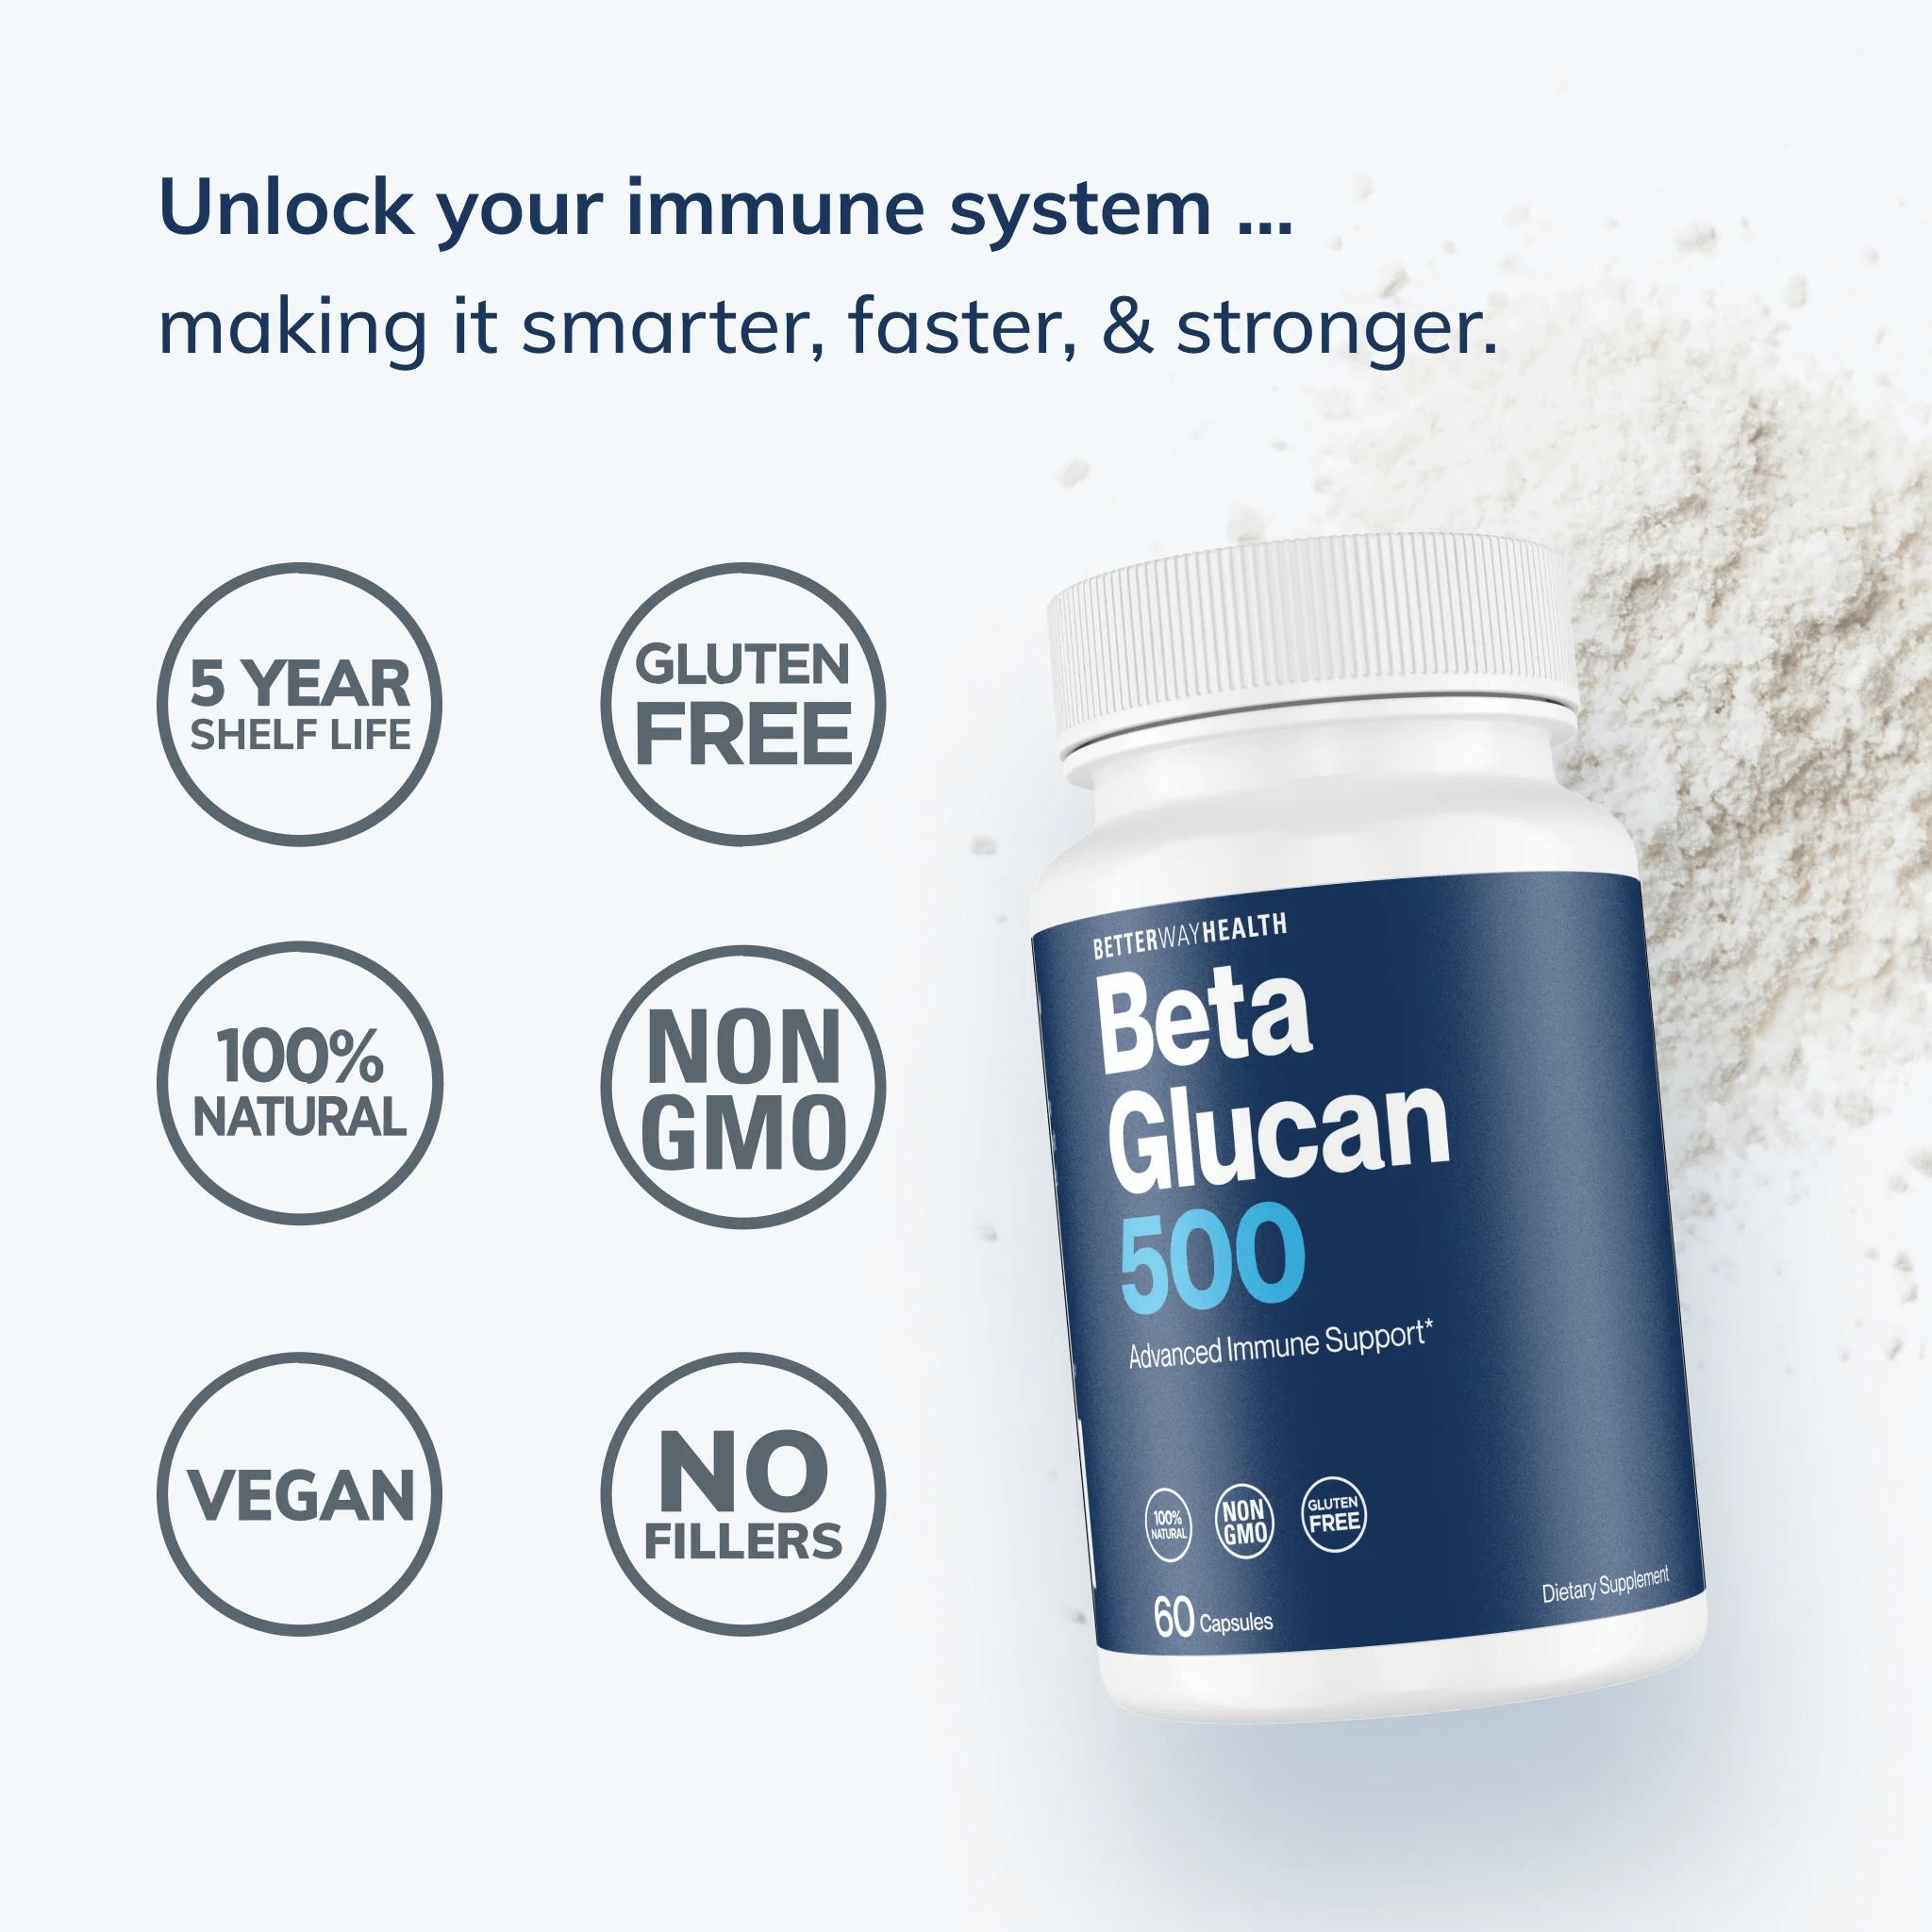 beta glucan details supporting graphic